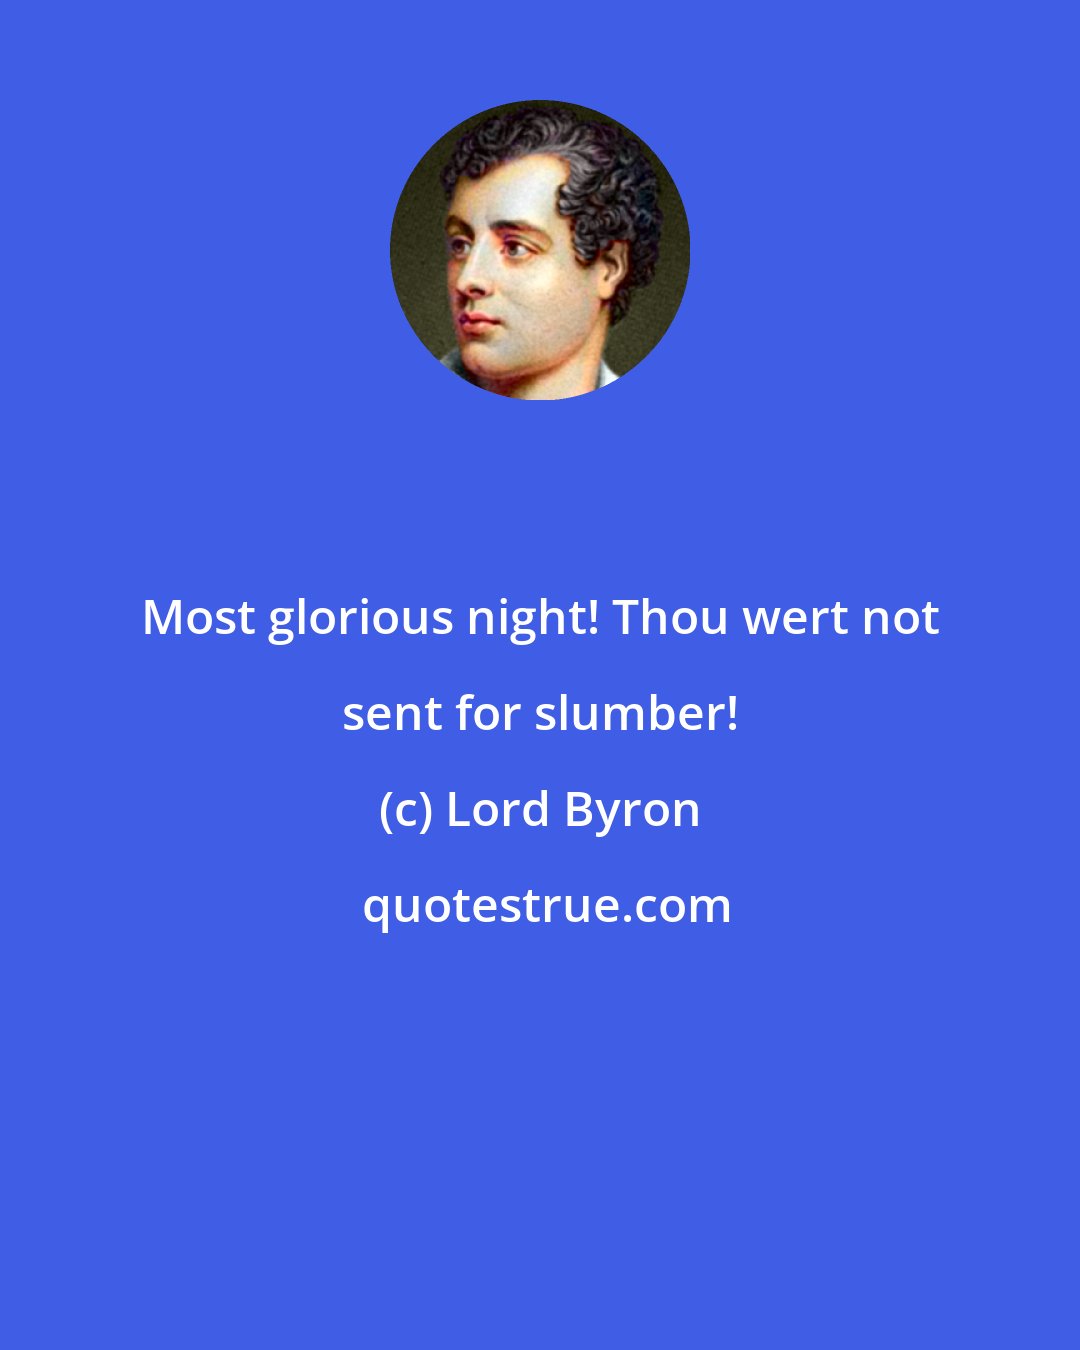 Lord Byron: Most glorious night! Thou wert not sent for slumber!